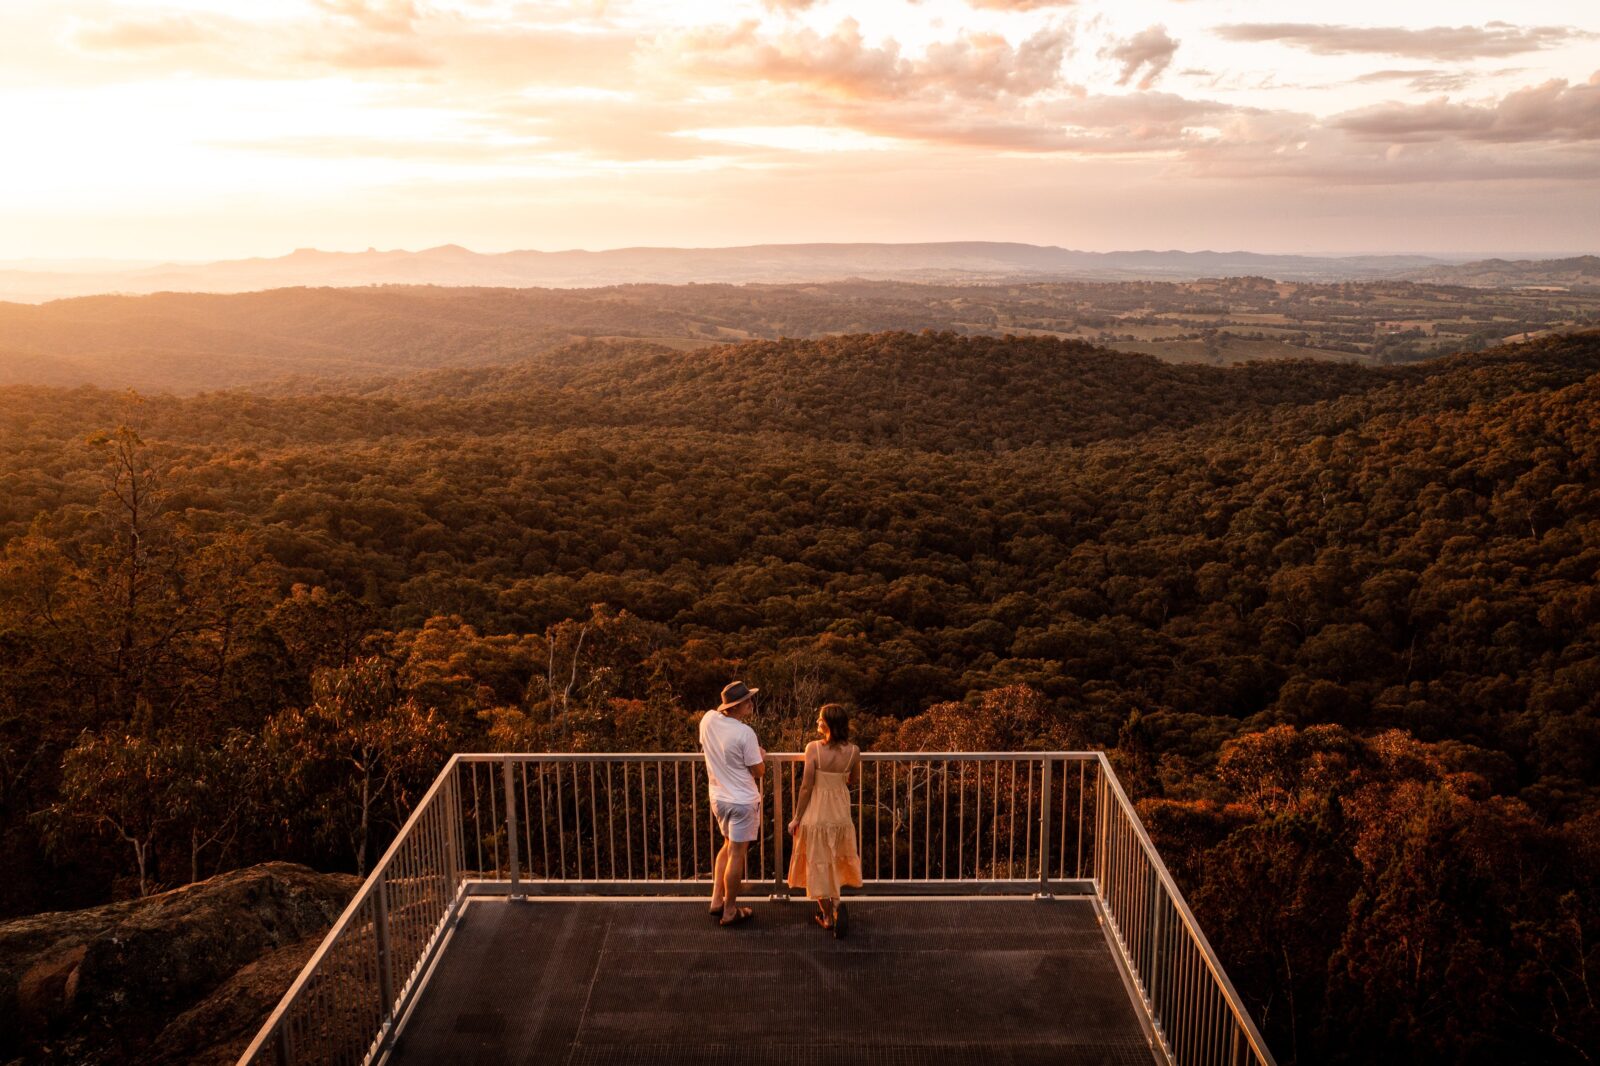 Drone photo of Yambla Lookout taken at sunset with a couple standing on the platform looking out.